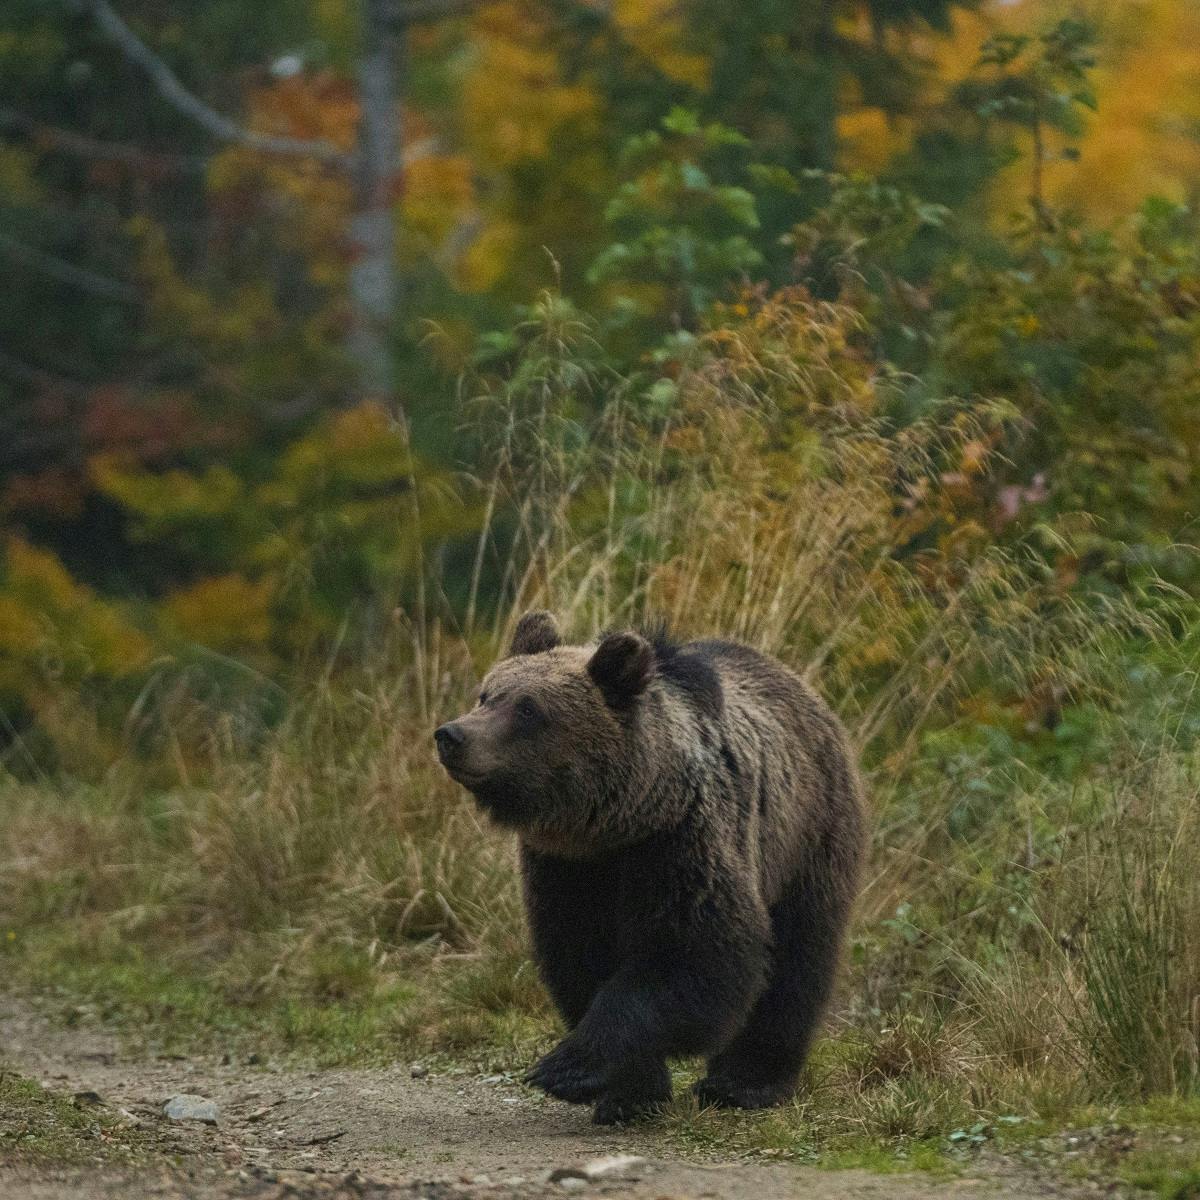 A European brown bear strolls across a forest path in Romania against a backdrop of green and golden leaves